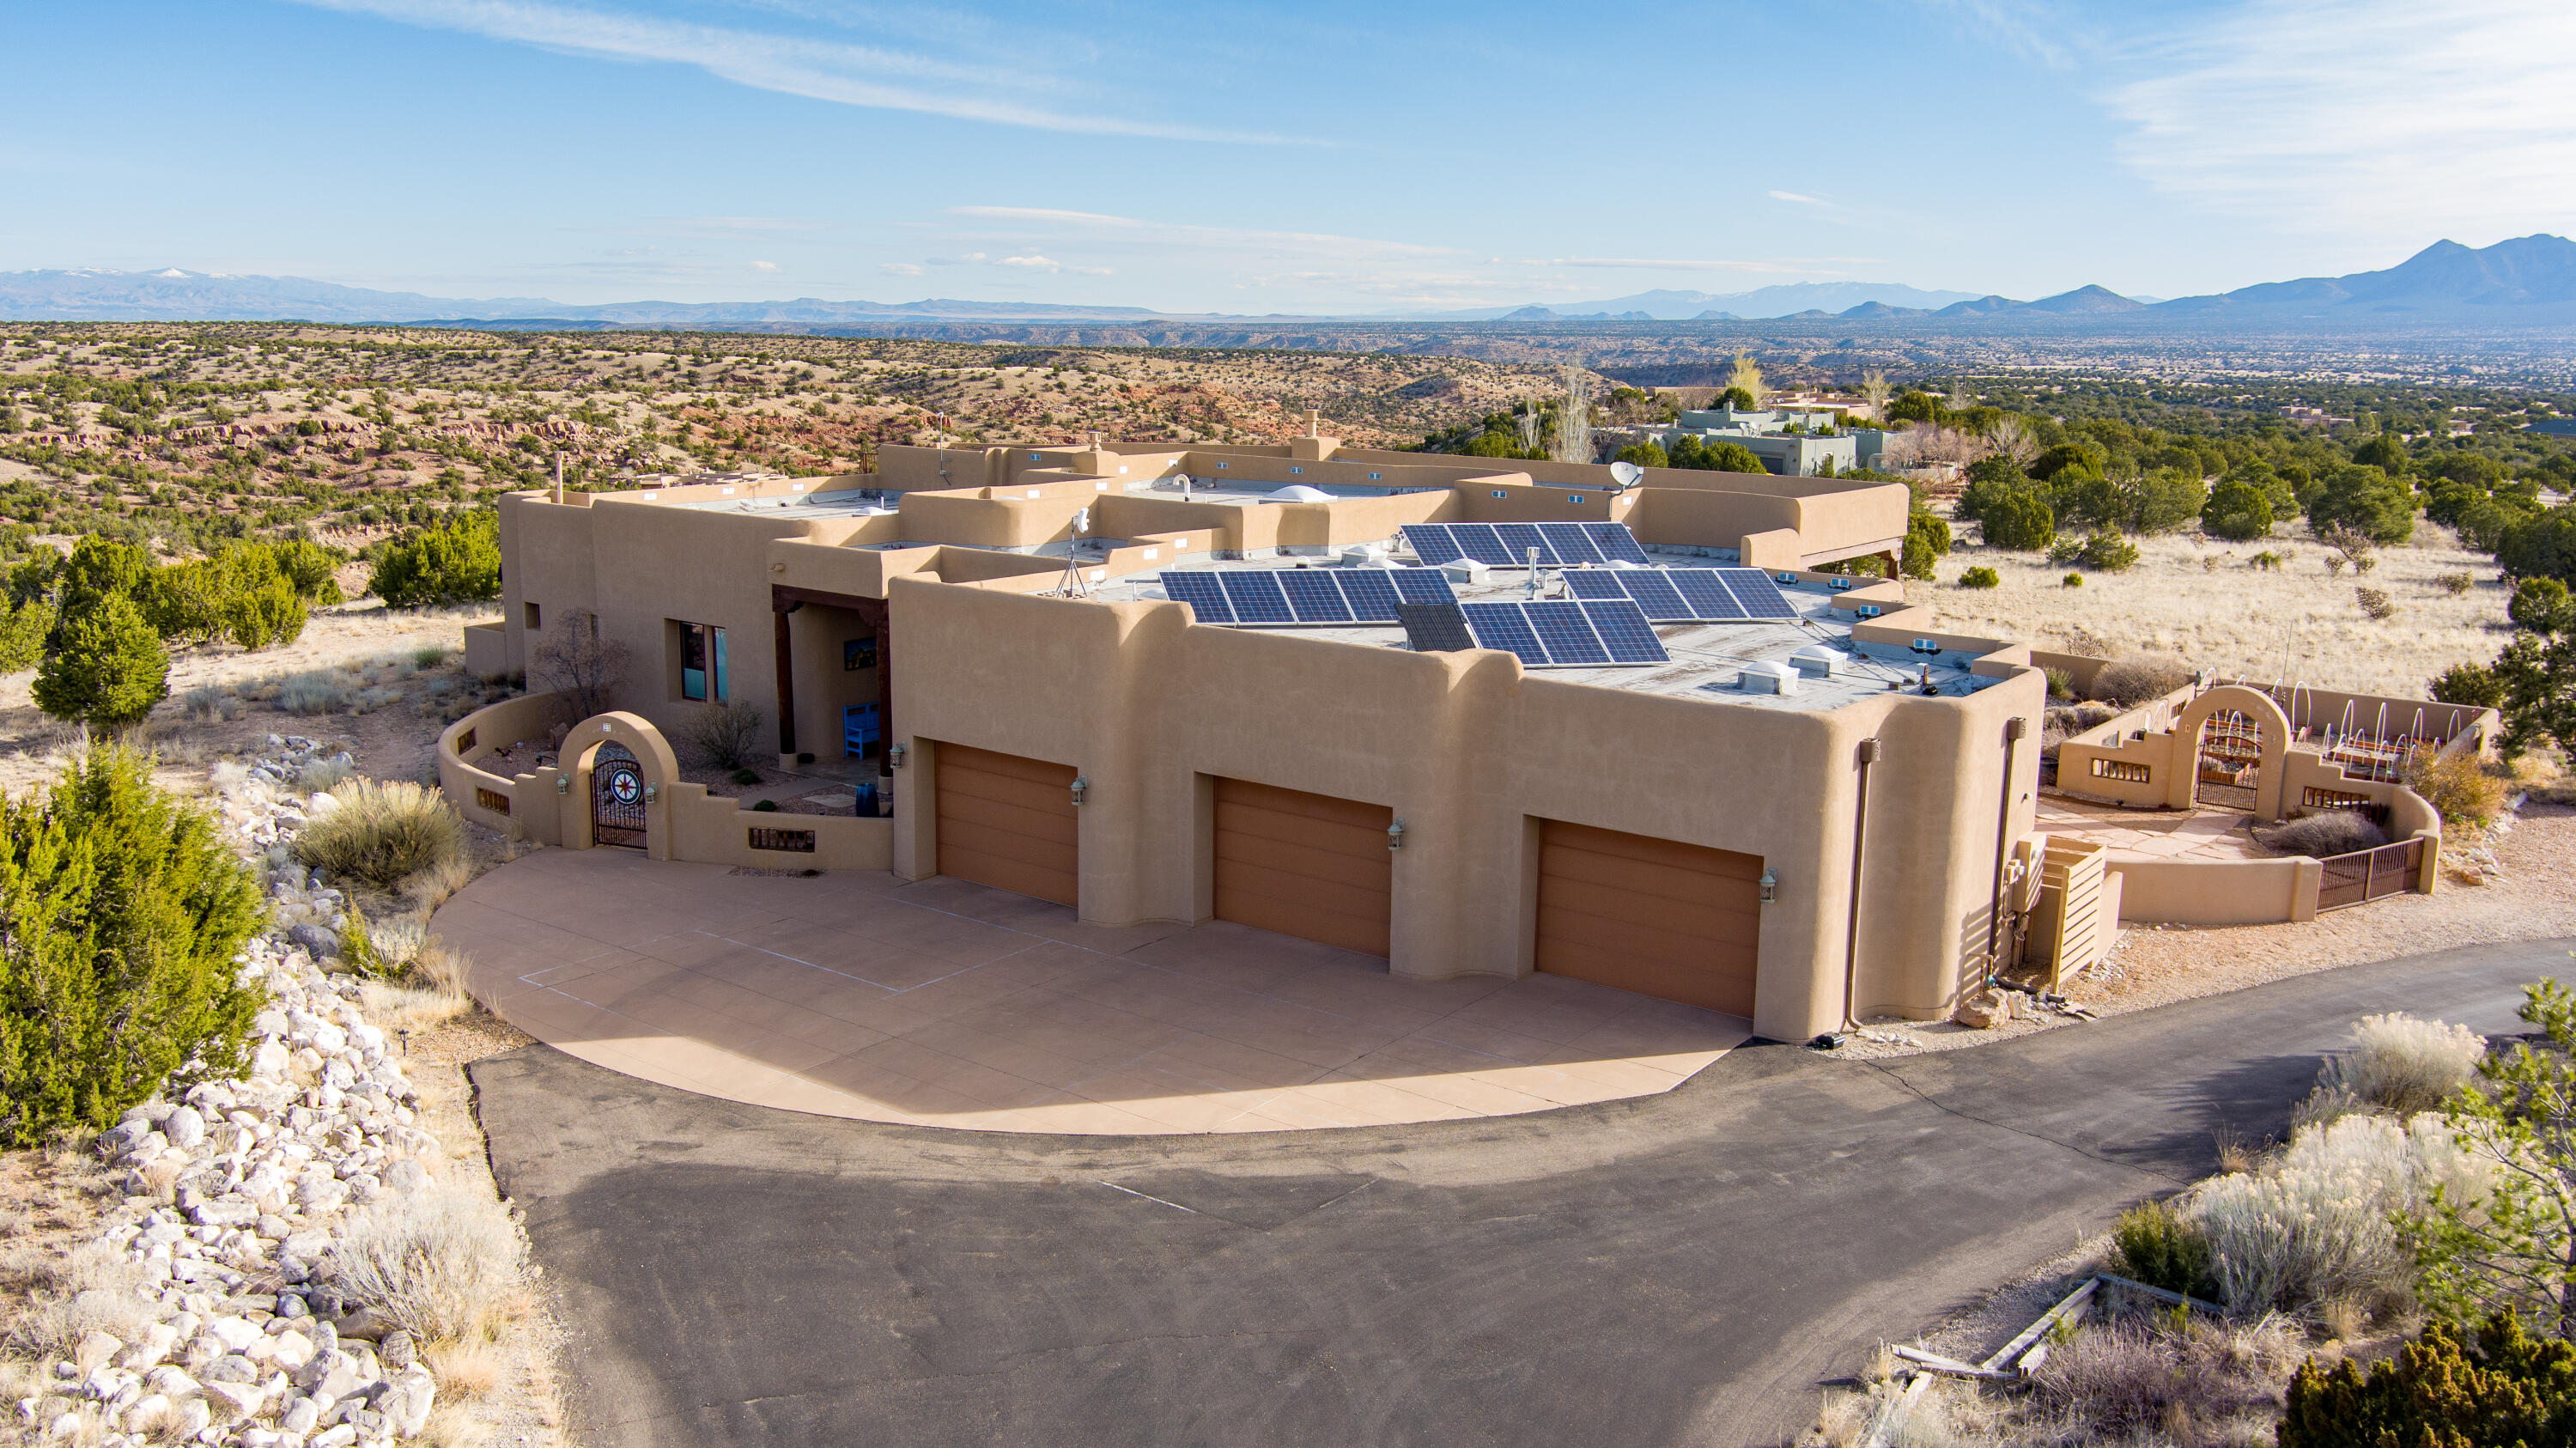 Open House Sun, 4/28, 11-1pm. Welcome to your dream eco-friendly oasis in the heart of the Southwest! This Certified Green Built home boasts upscale design and luxurious features throughout. Step into the lovely courtyard and walk inside the impressive foyer...you will be greeted by the spacious greatroom with 12ft ceilings & kiva fireplace, perfect for entertaining guests. The huge kitchen is a chef's delight with high-end appliances and ample counter space & cabinets. Every window in the home offers breathtaking Mountain Views, creating a serene backdrop for daily living. Step outside to enjoy the outdoor kitchen, with kiva fireplace and covered patio with 14' tongue and groove ceilings, perfect for al-fresco dining.  Home features 3 bedrooms plus an office/media room...(con't)